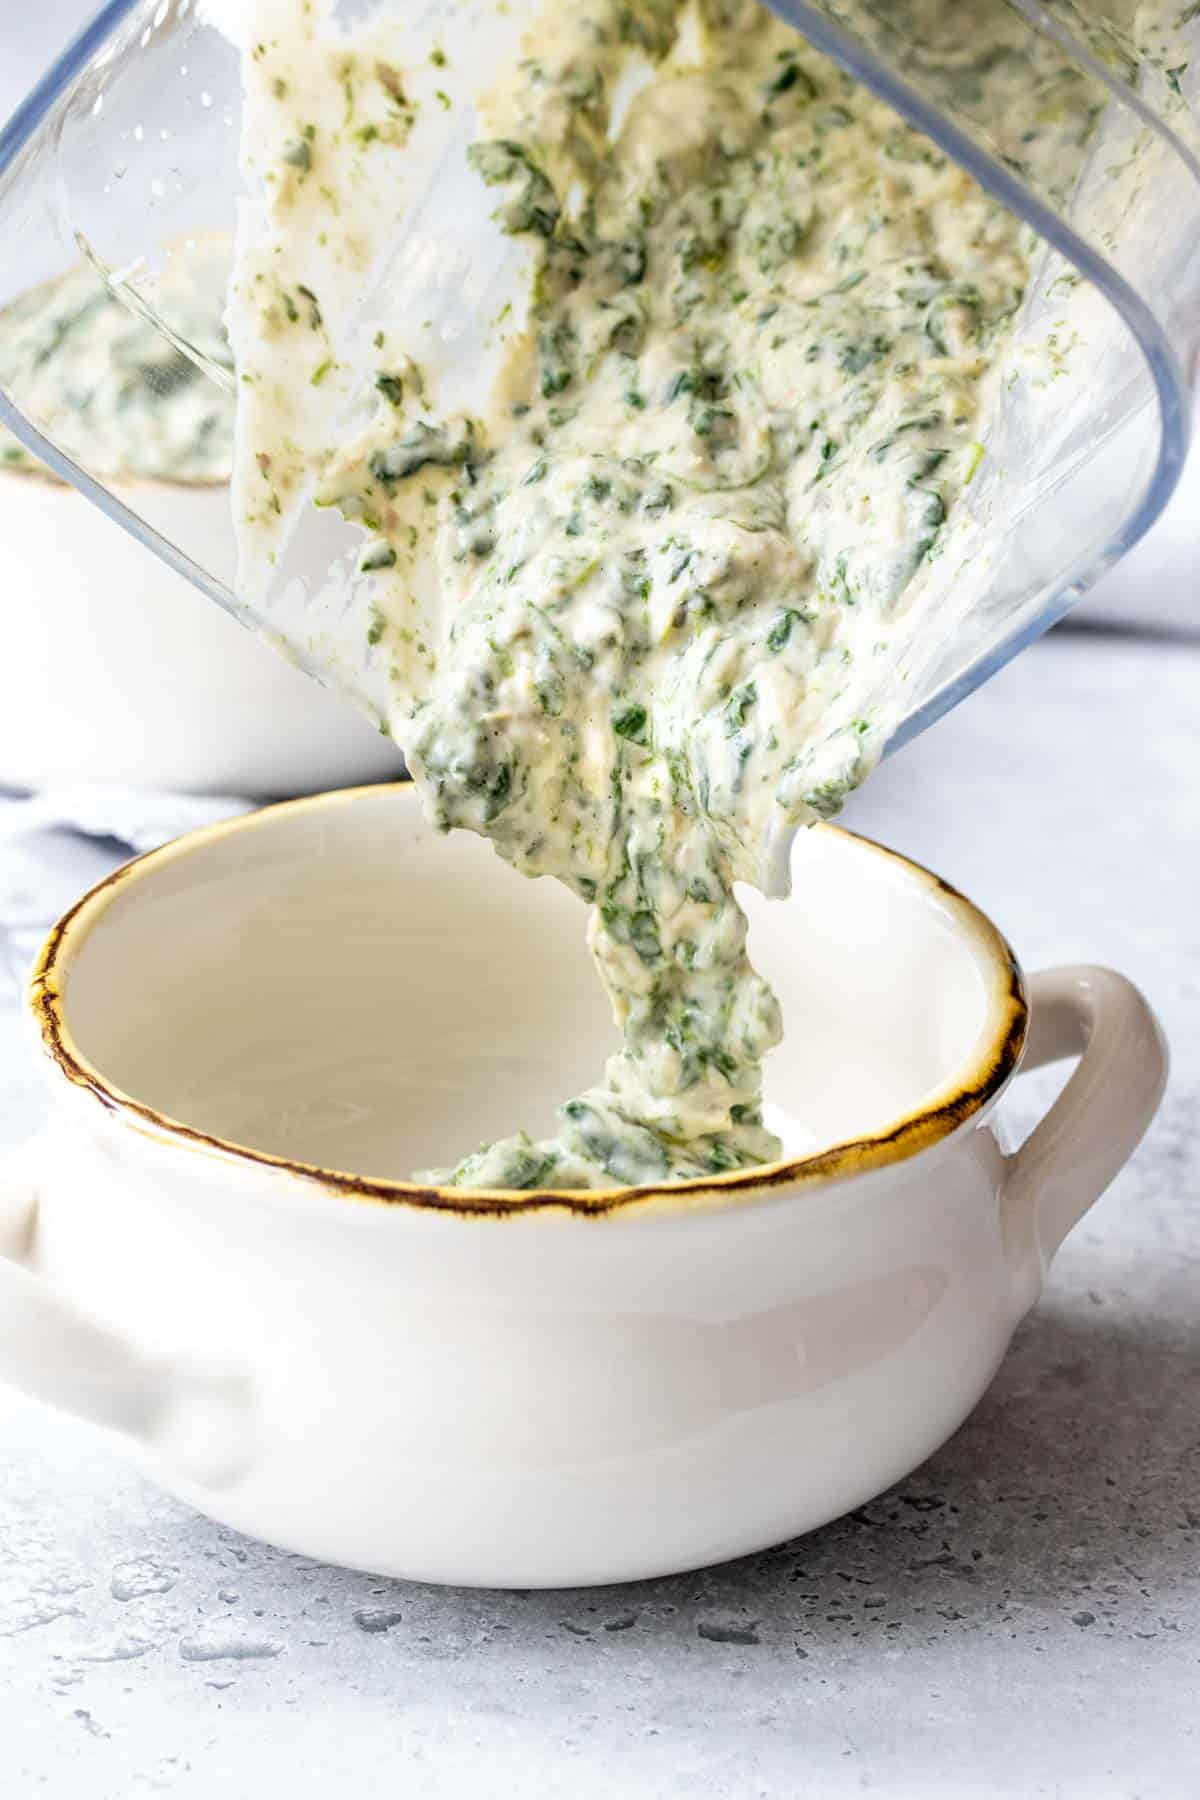 A blender pouring a spinach artichoke creamy dip mixture into a white ceramic bowl with handles